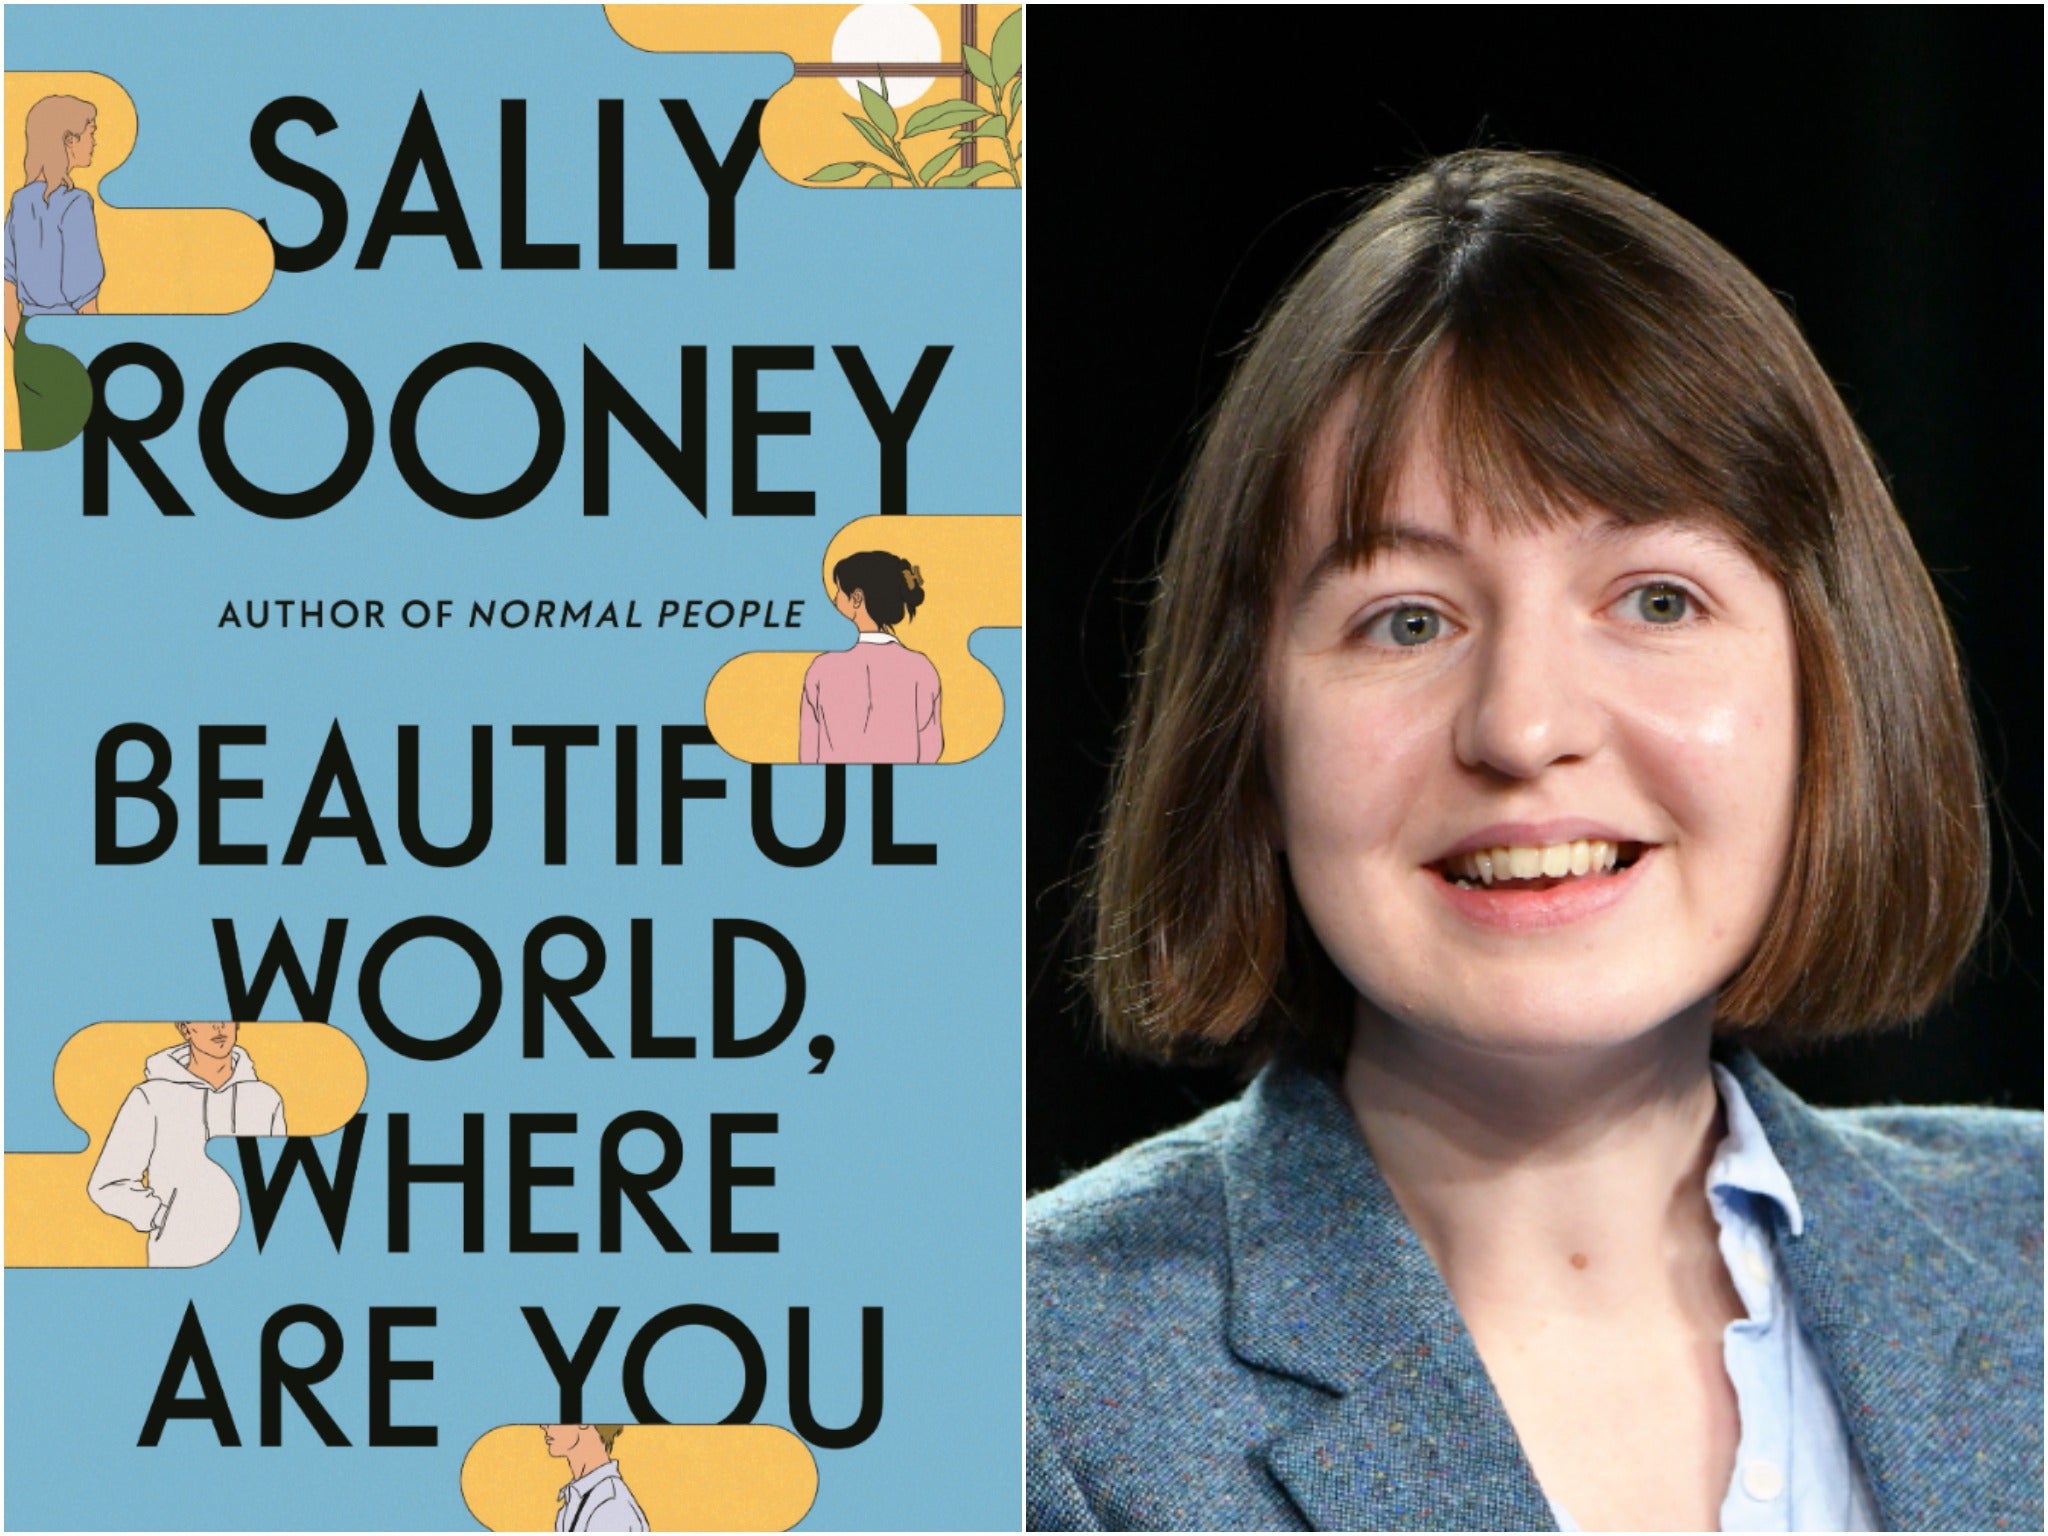 The success of ‘Normal People’ and ‘Conversations with Friends’ has made Sally Rooney’s ‘Beautiful World, Where Are You’ one of the year’s most hotly anticipated releases